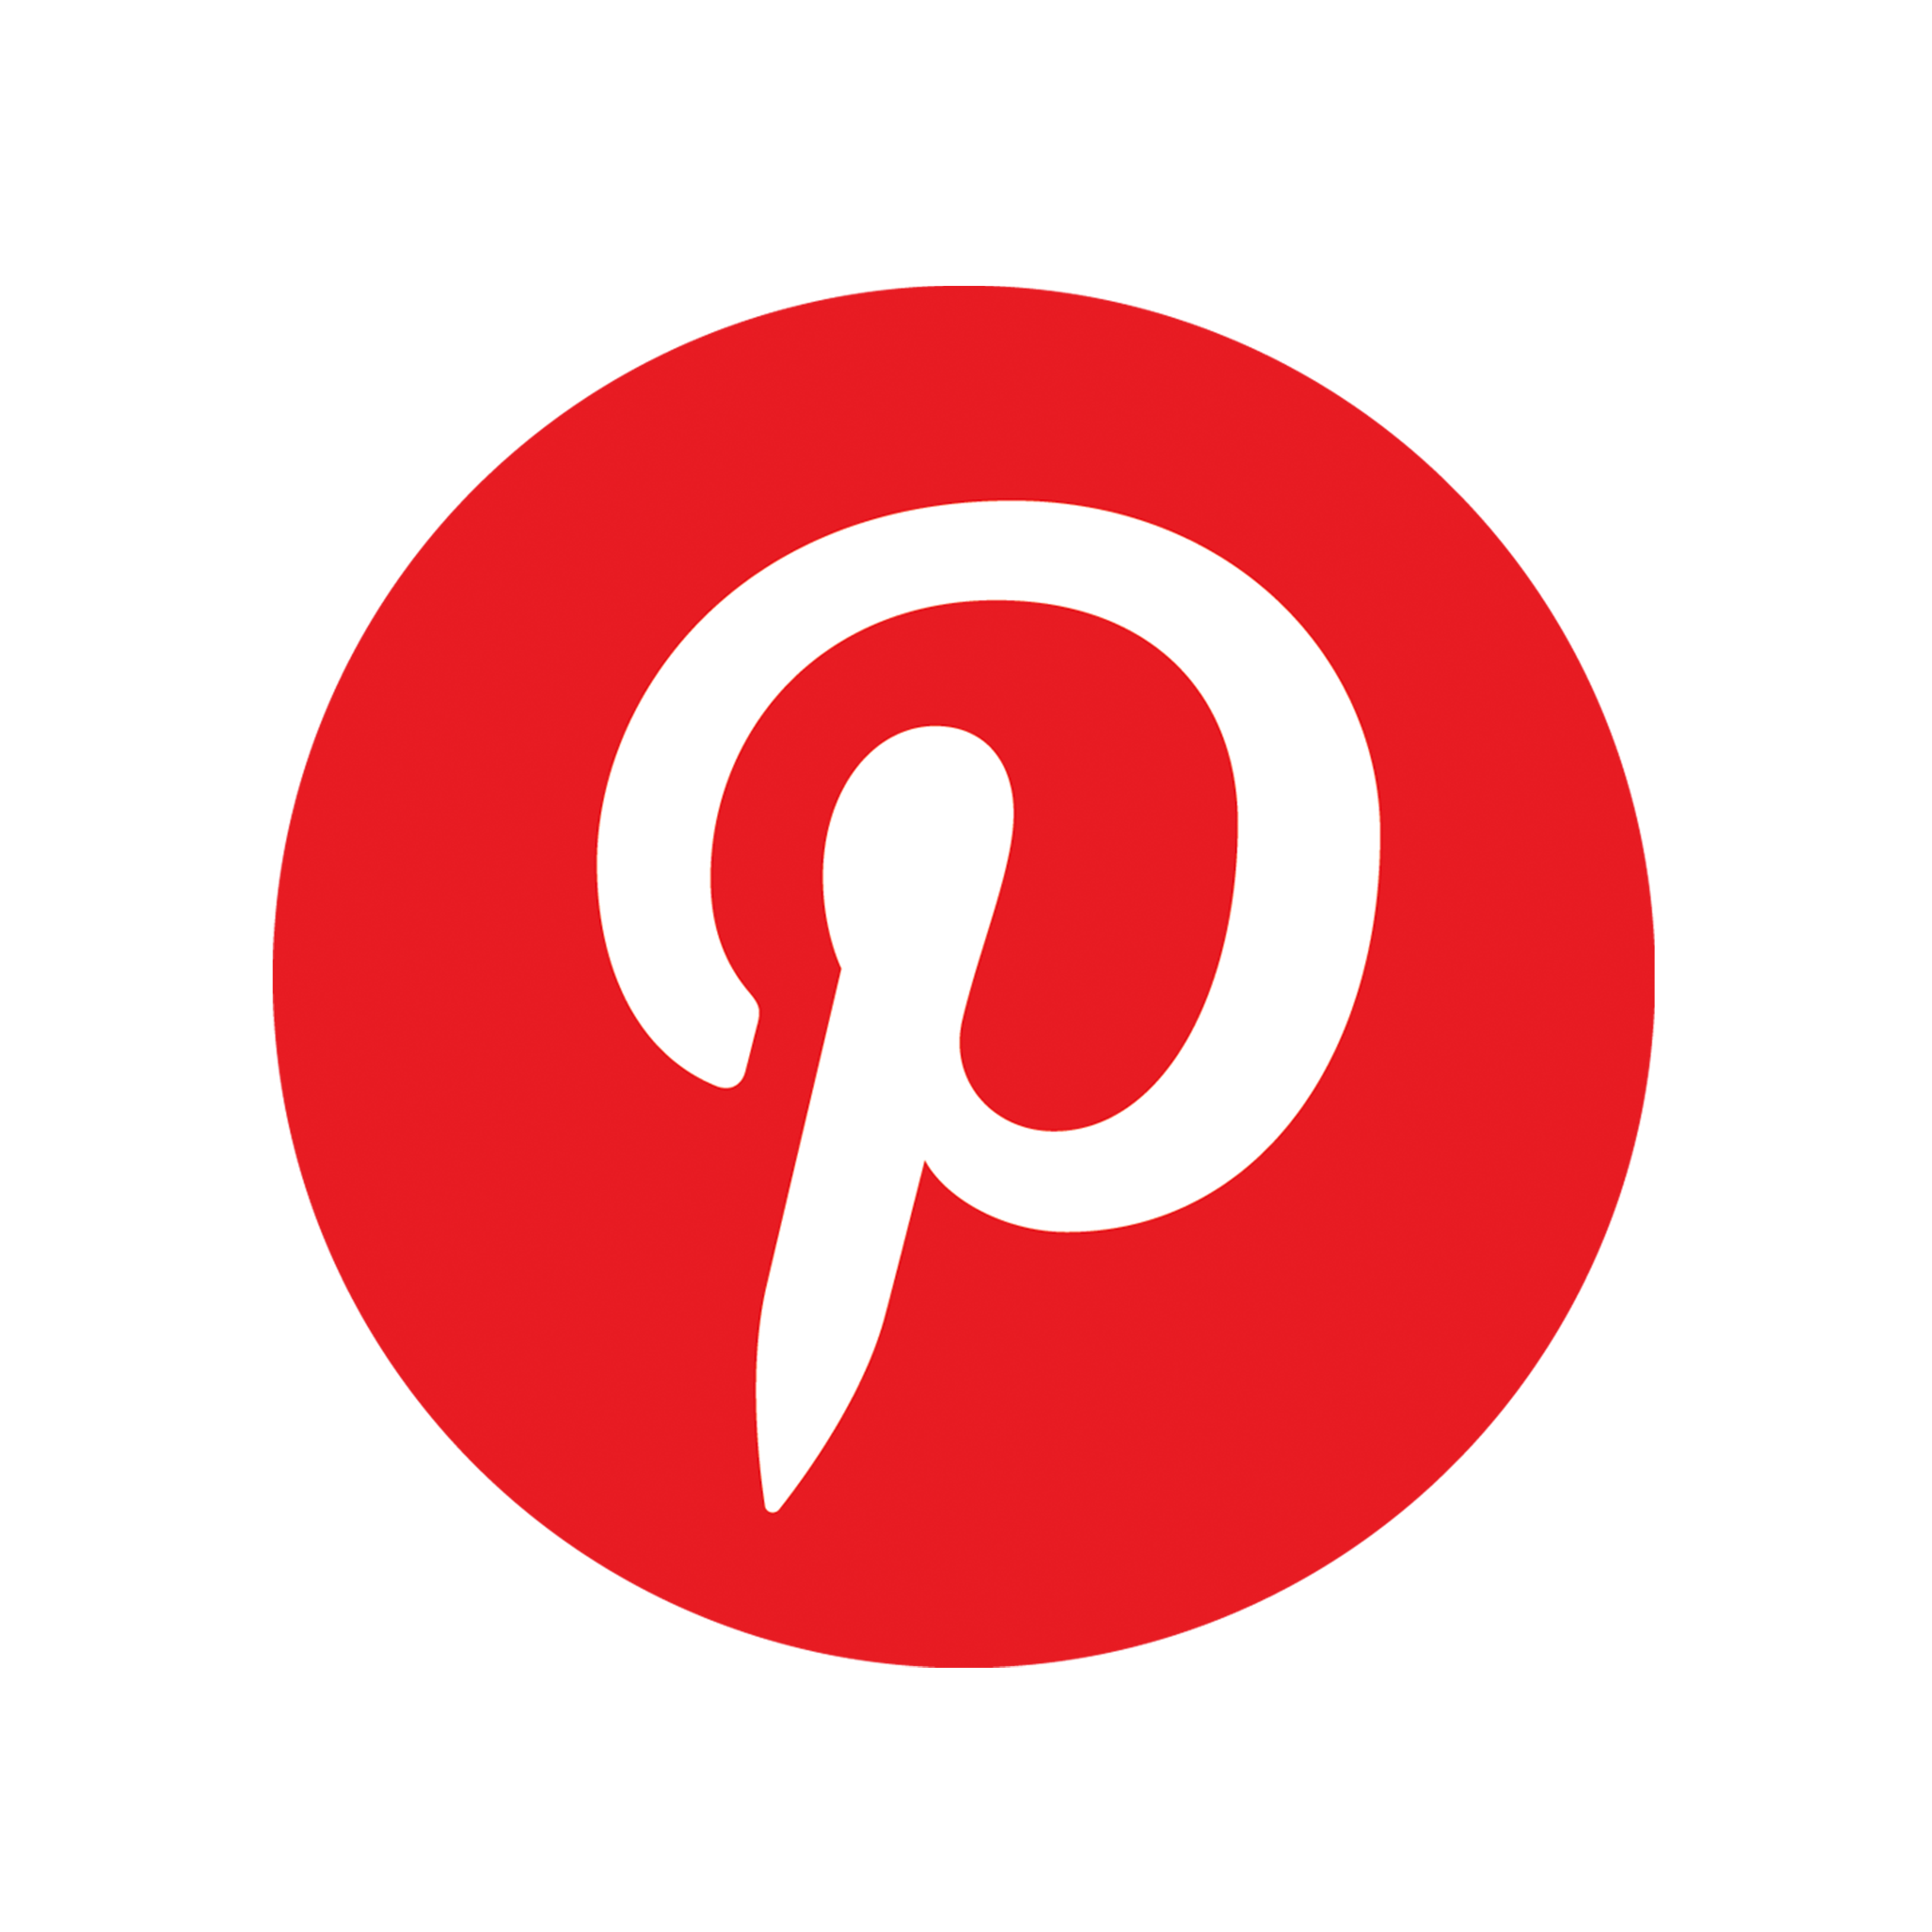 Occasion and Pinterest integration